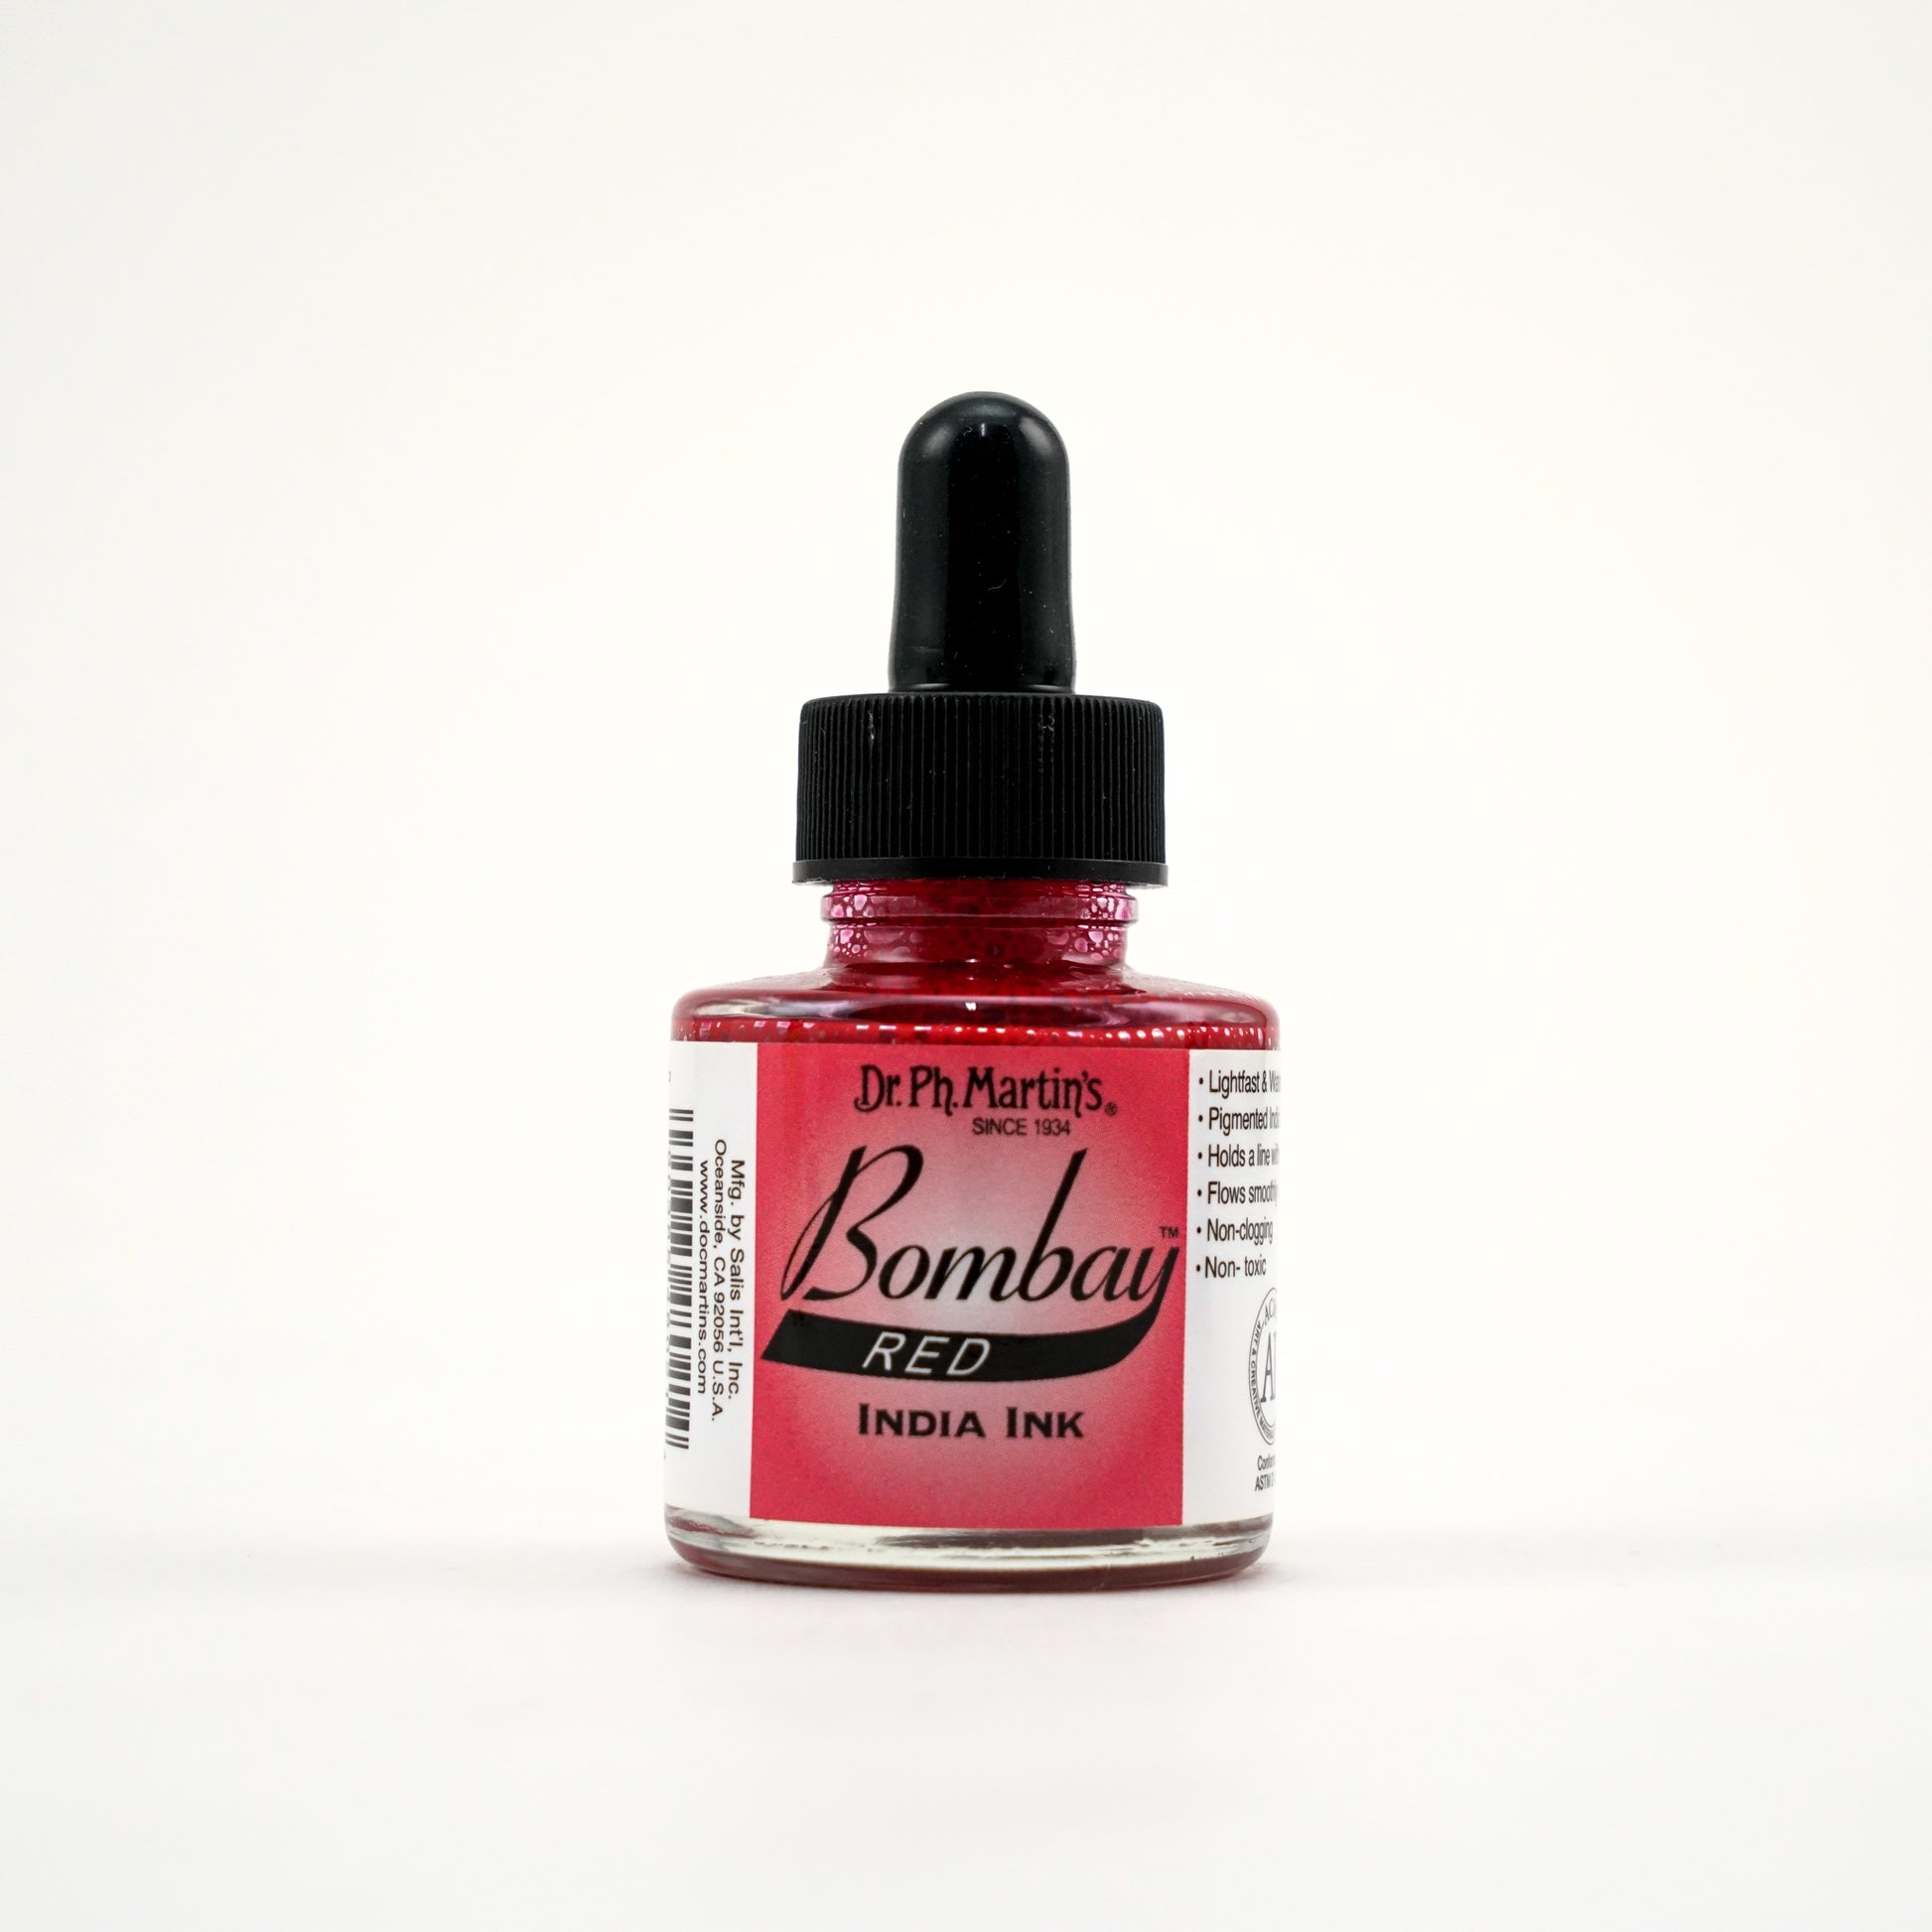 Dr. Ph. Martin's Bombay India Ink - Red by Dr. Ph. Martin’s - K. A. Artist Shop